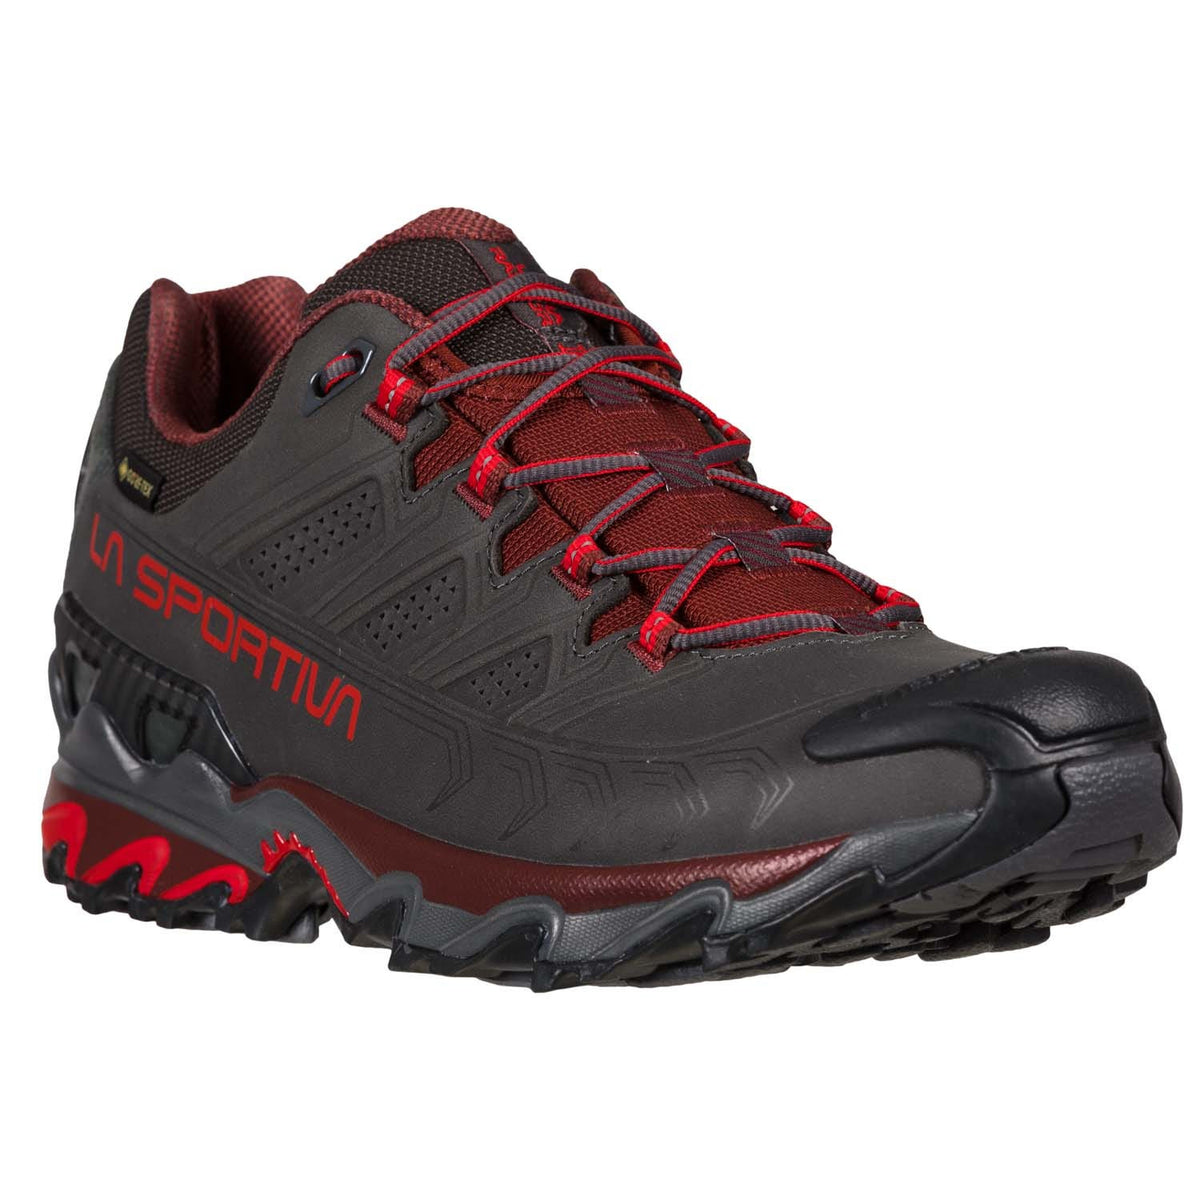 La Sportiva Ultra Raptor ll LTHR GTX in Carbon Spice colour, side on view showing logo